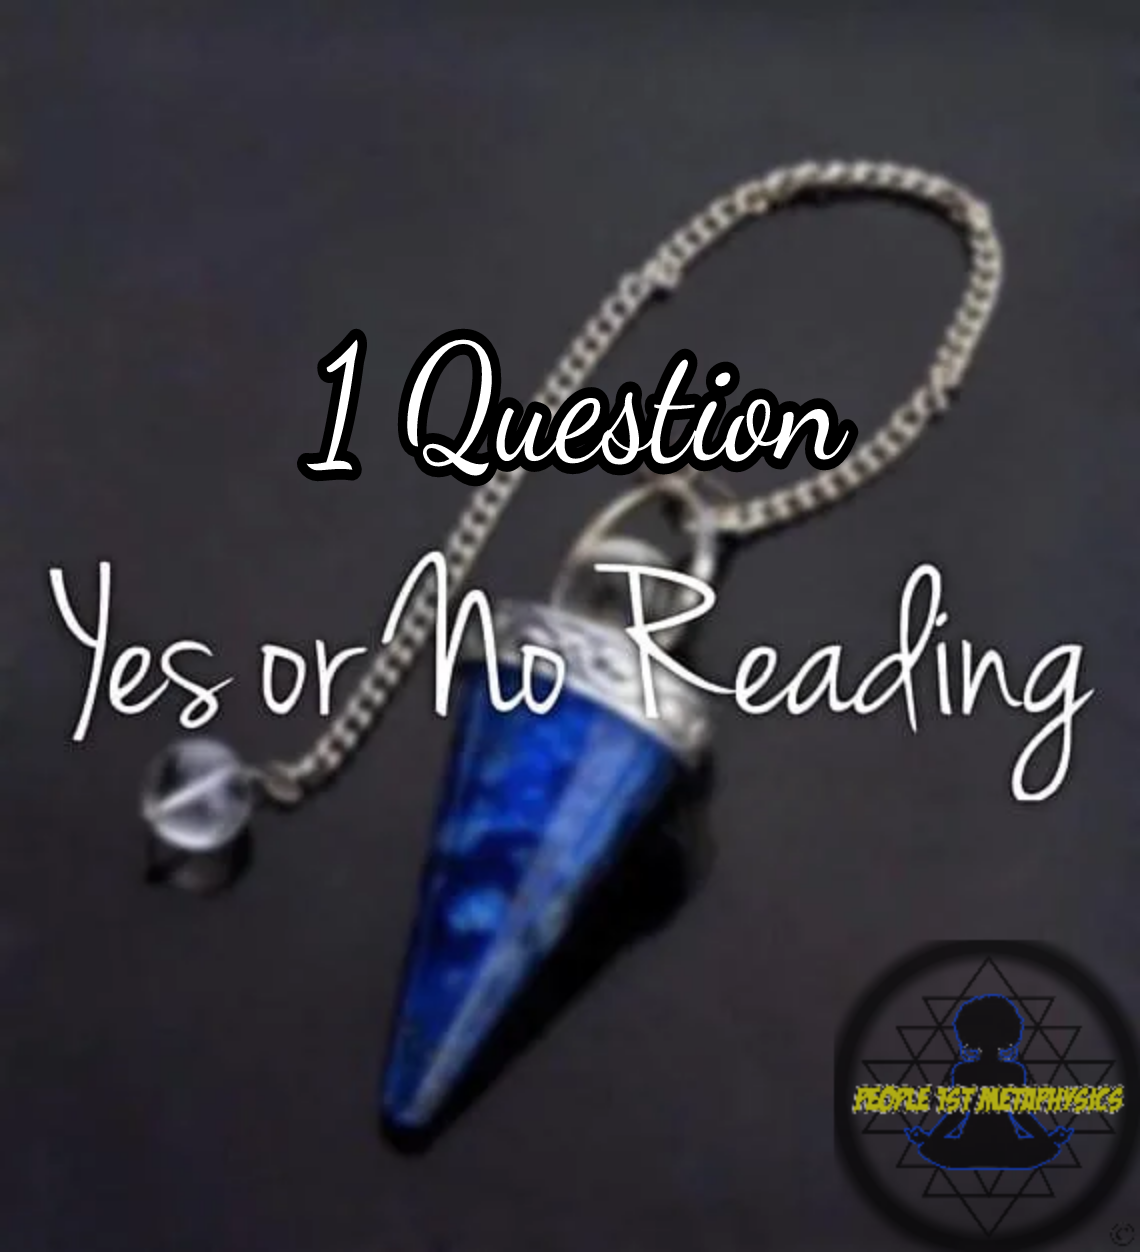 Ask any yes or no question (1 question) & 1 Card Tarot Pull #PsychicReadings #People1stMetaPhysics #PendulumReadings #EnergyReadings